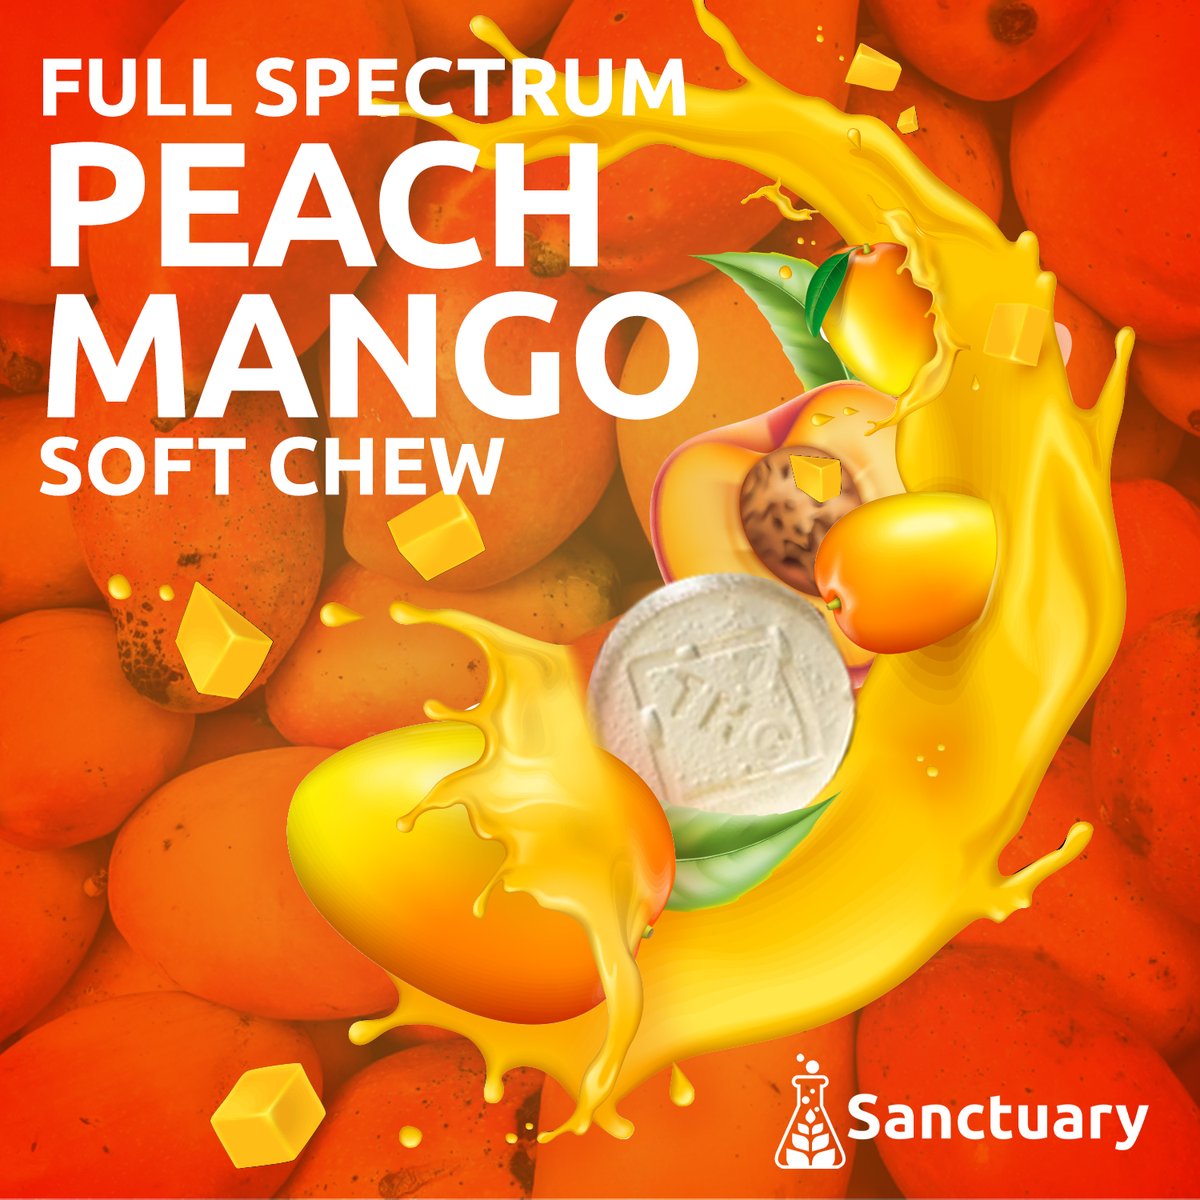 Dive into a burst of peachy mango goodness with our Full Spectrum Soft Chews! 🍑🥭 Crafted for ultimate chill vibes and sweet relief. 🌿 🍃 Sanctuary FL 🌐 sanctuarymed.com 21+ Only. No sales on social platforms. Subject to in-store availability.